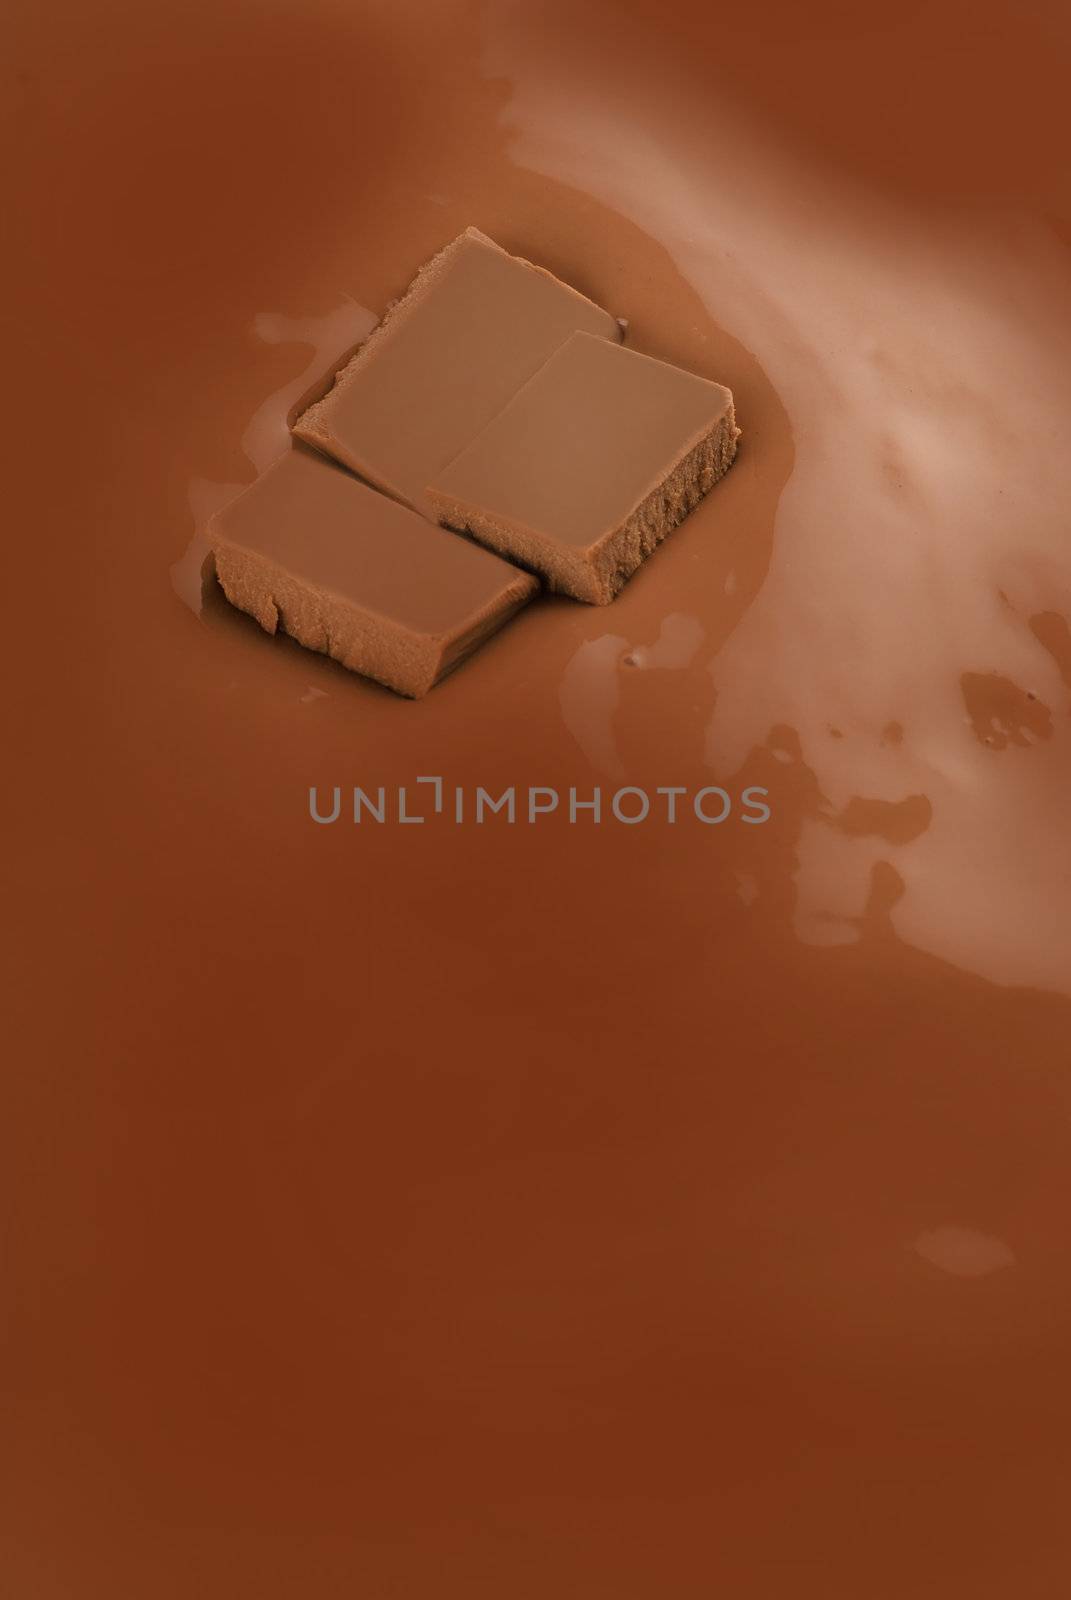 Melting chocolate by alistaircotton